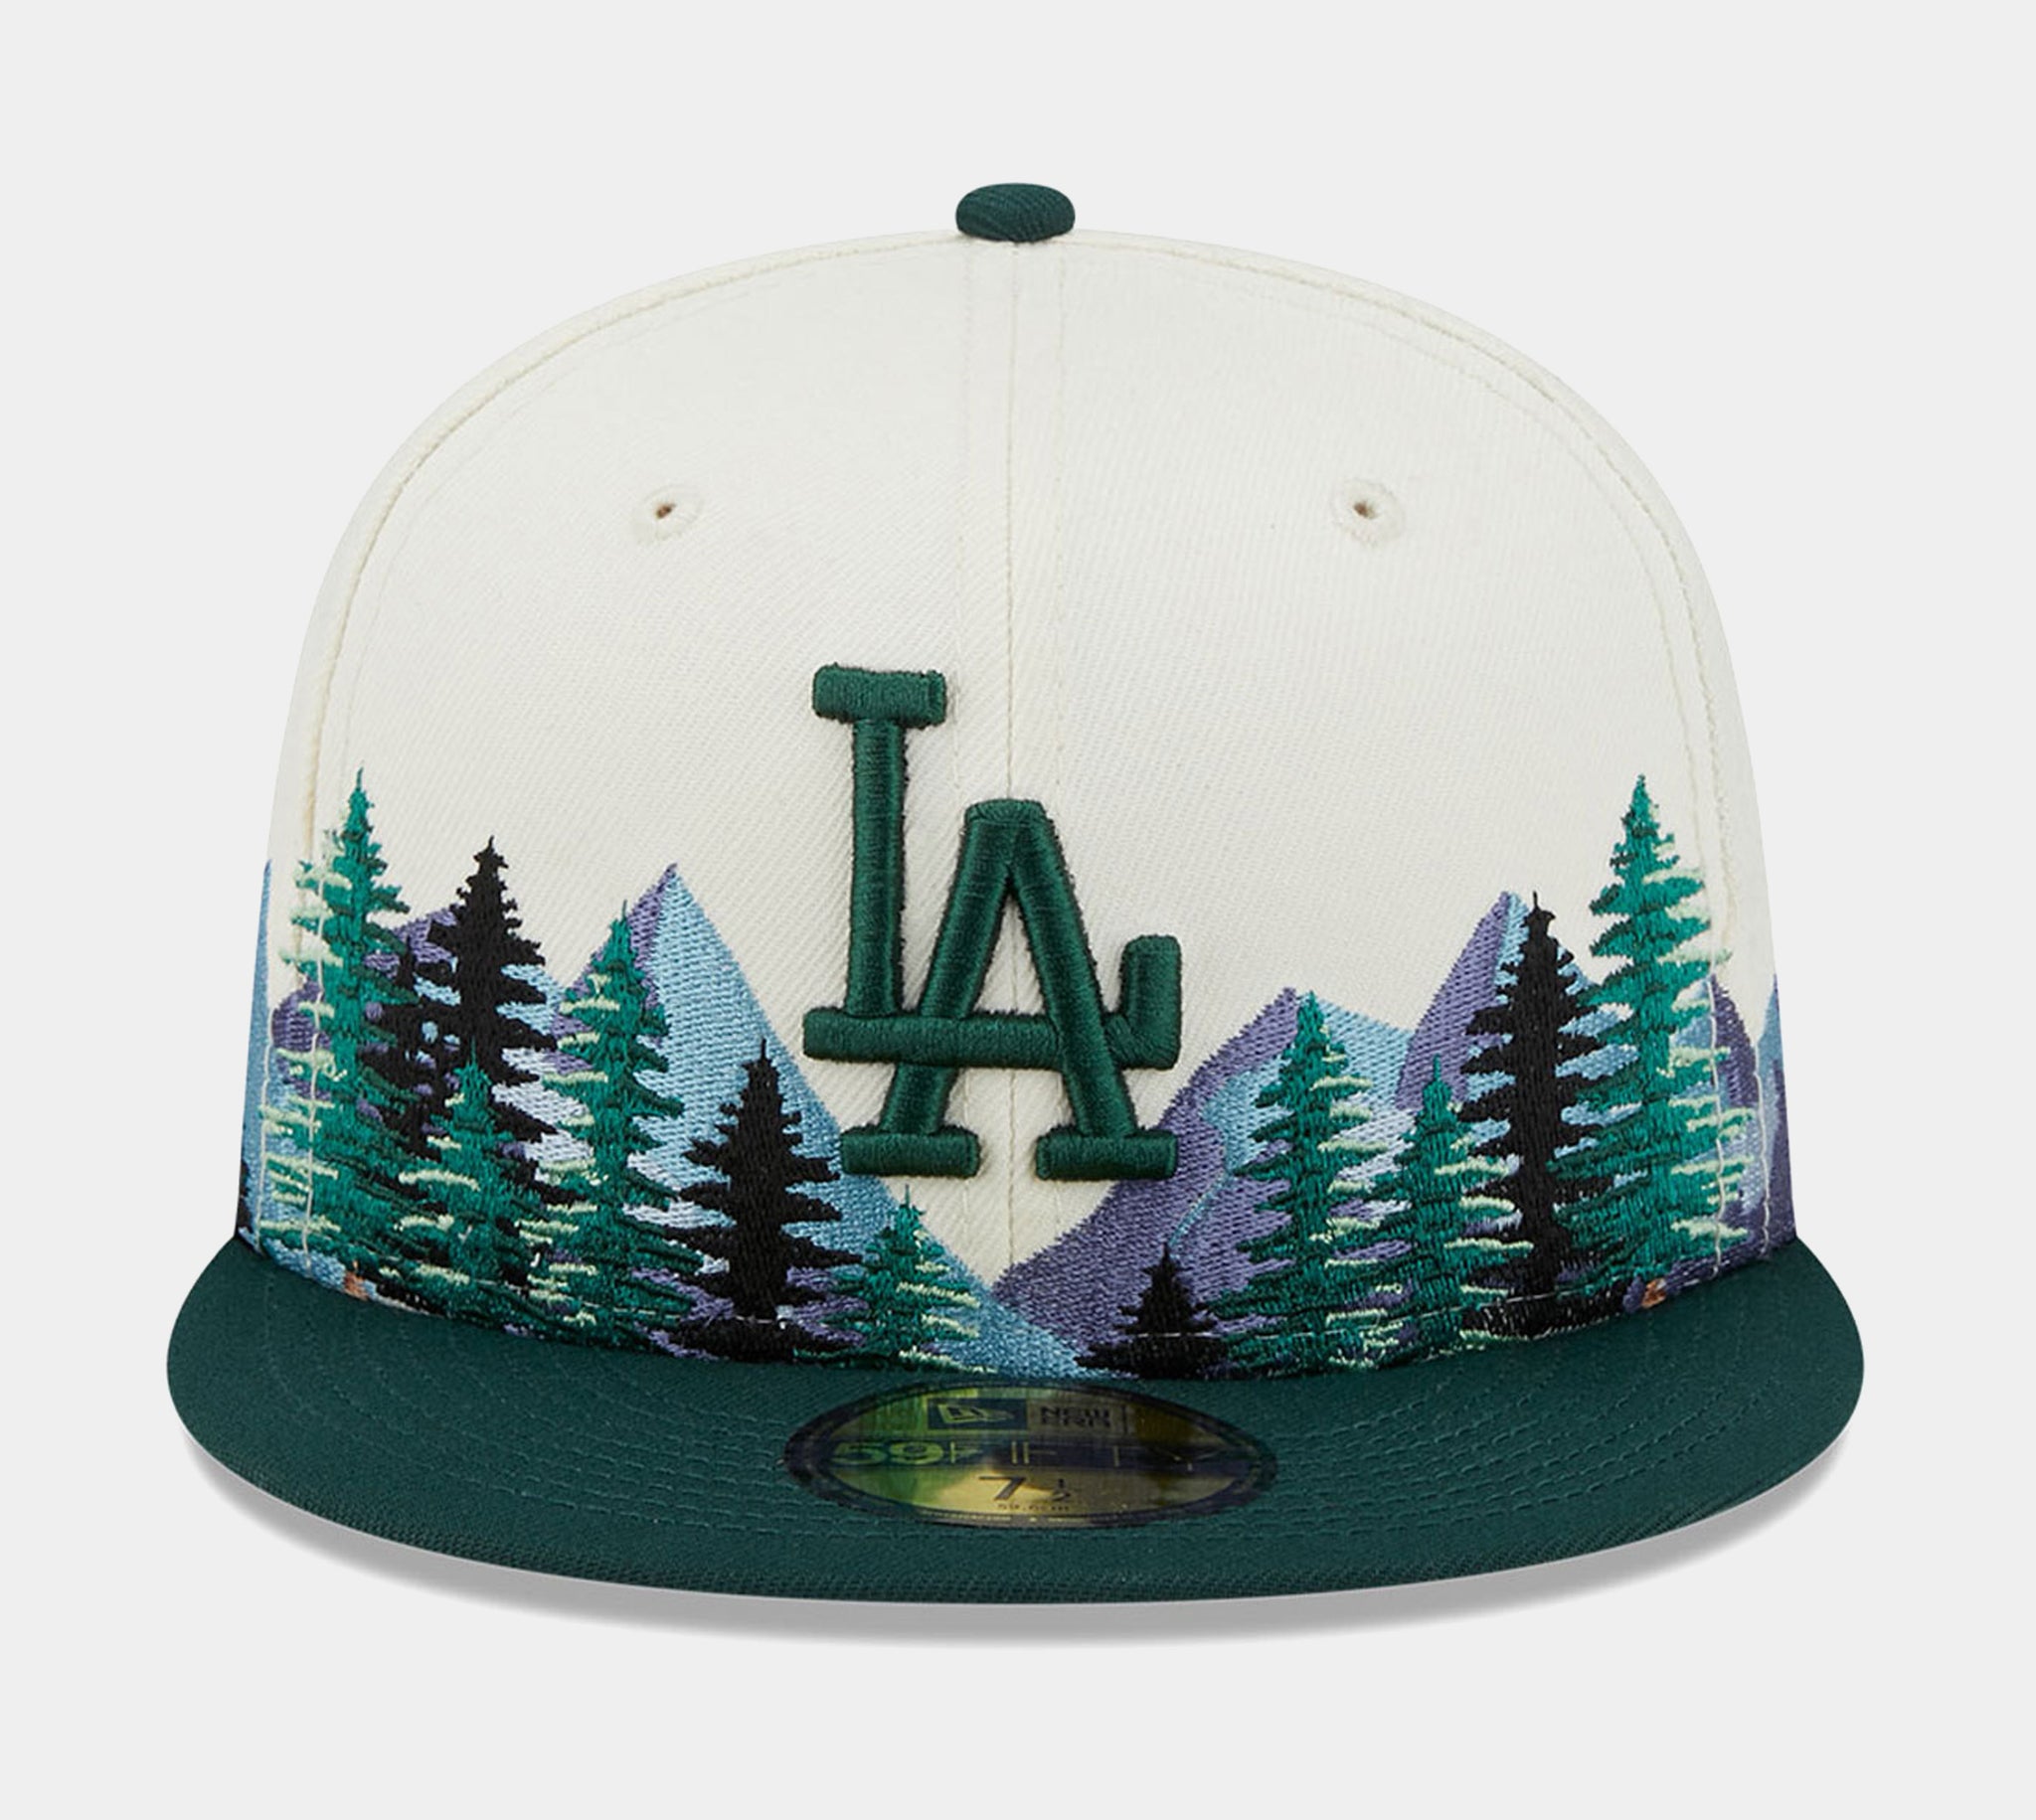 New Era Los Angeles Dodgers Outdoor 59FIFTY Mens Fitted Hat (White/Green)